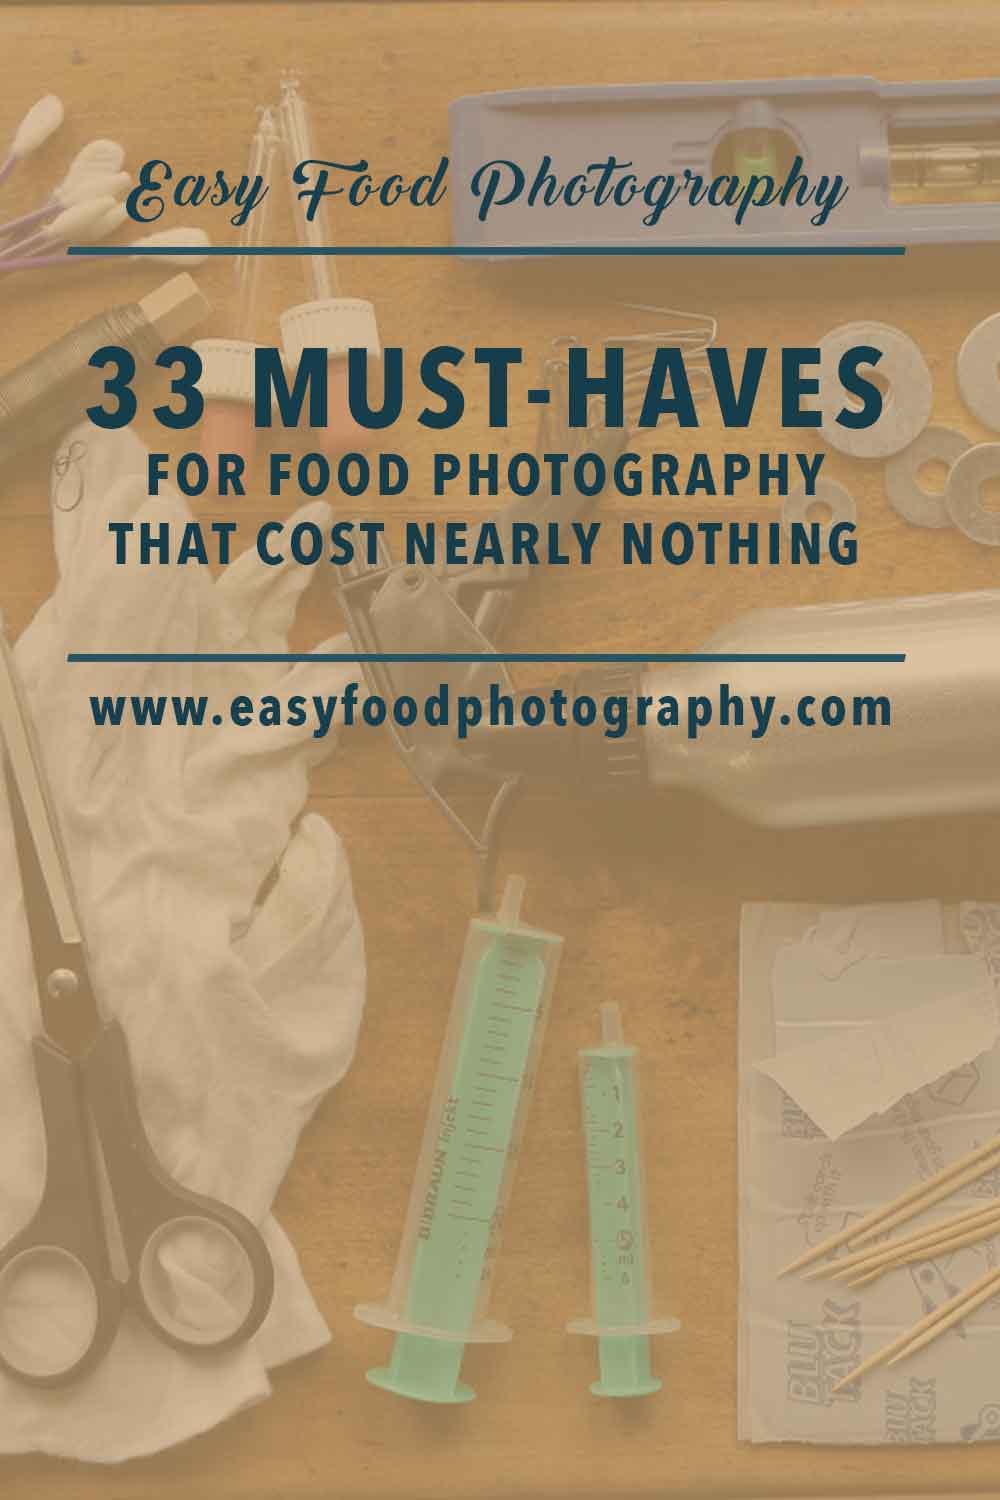 33 MUST-HAVES FOR FOOD PHOTOGRAPHY IN 2022 THAT COST NEARLY NOTHING